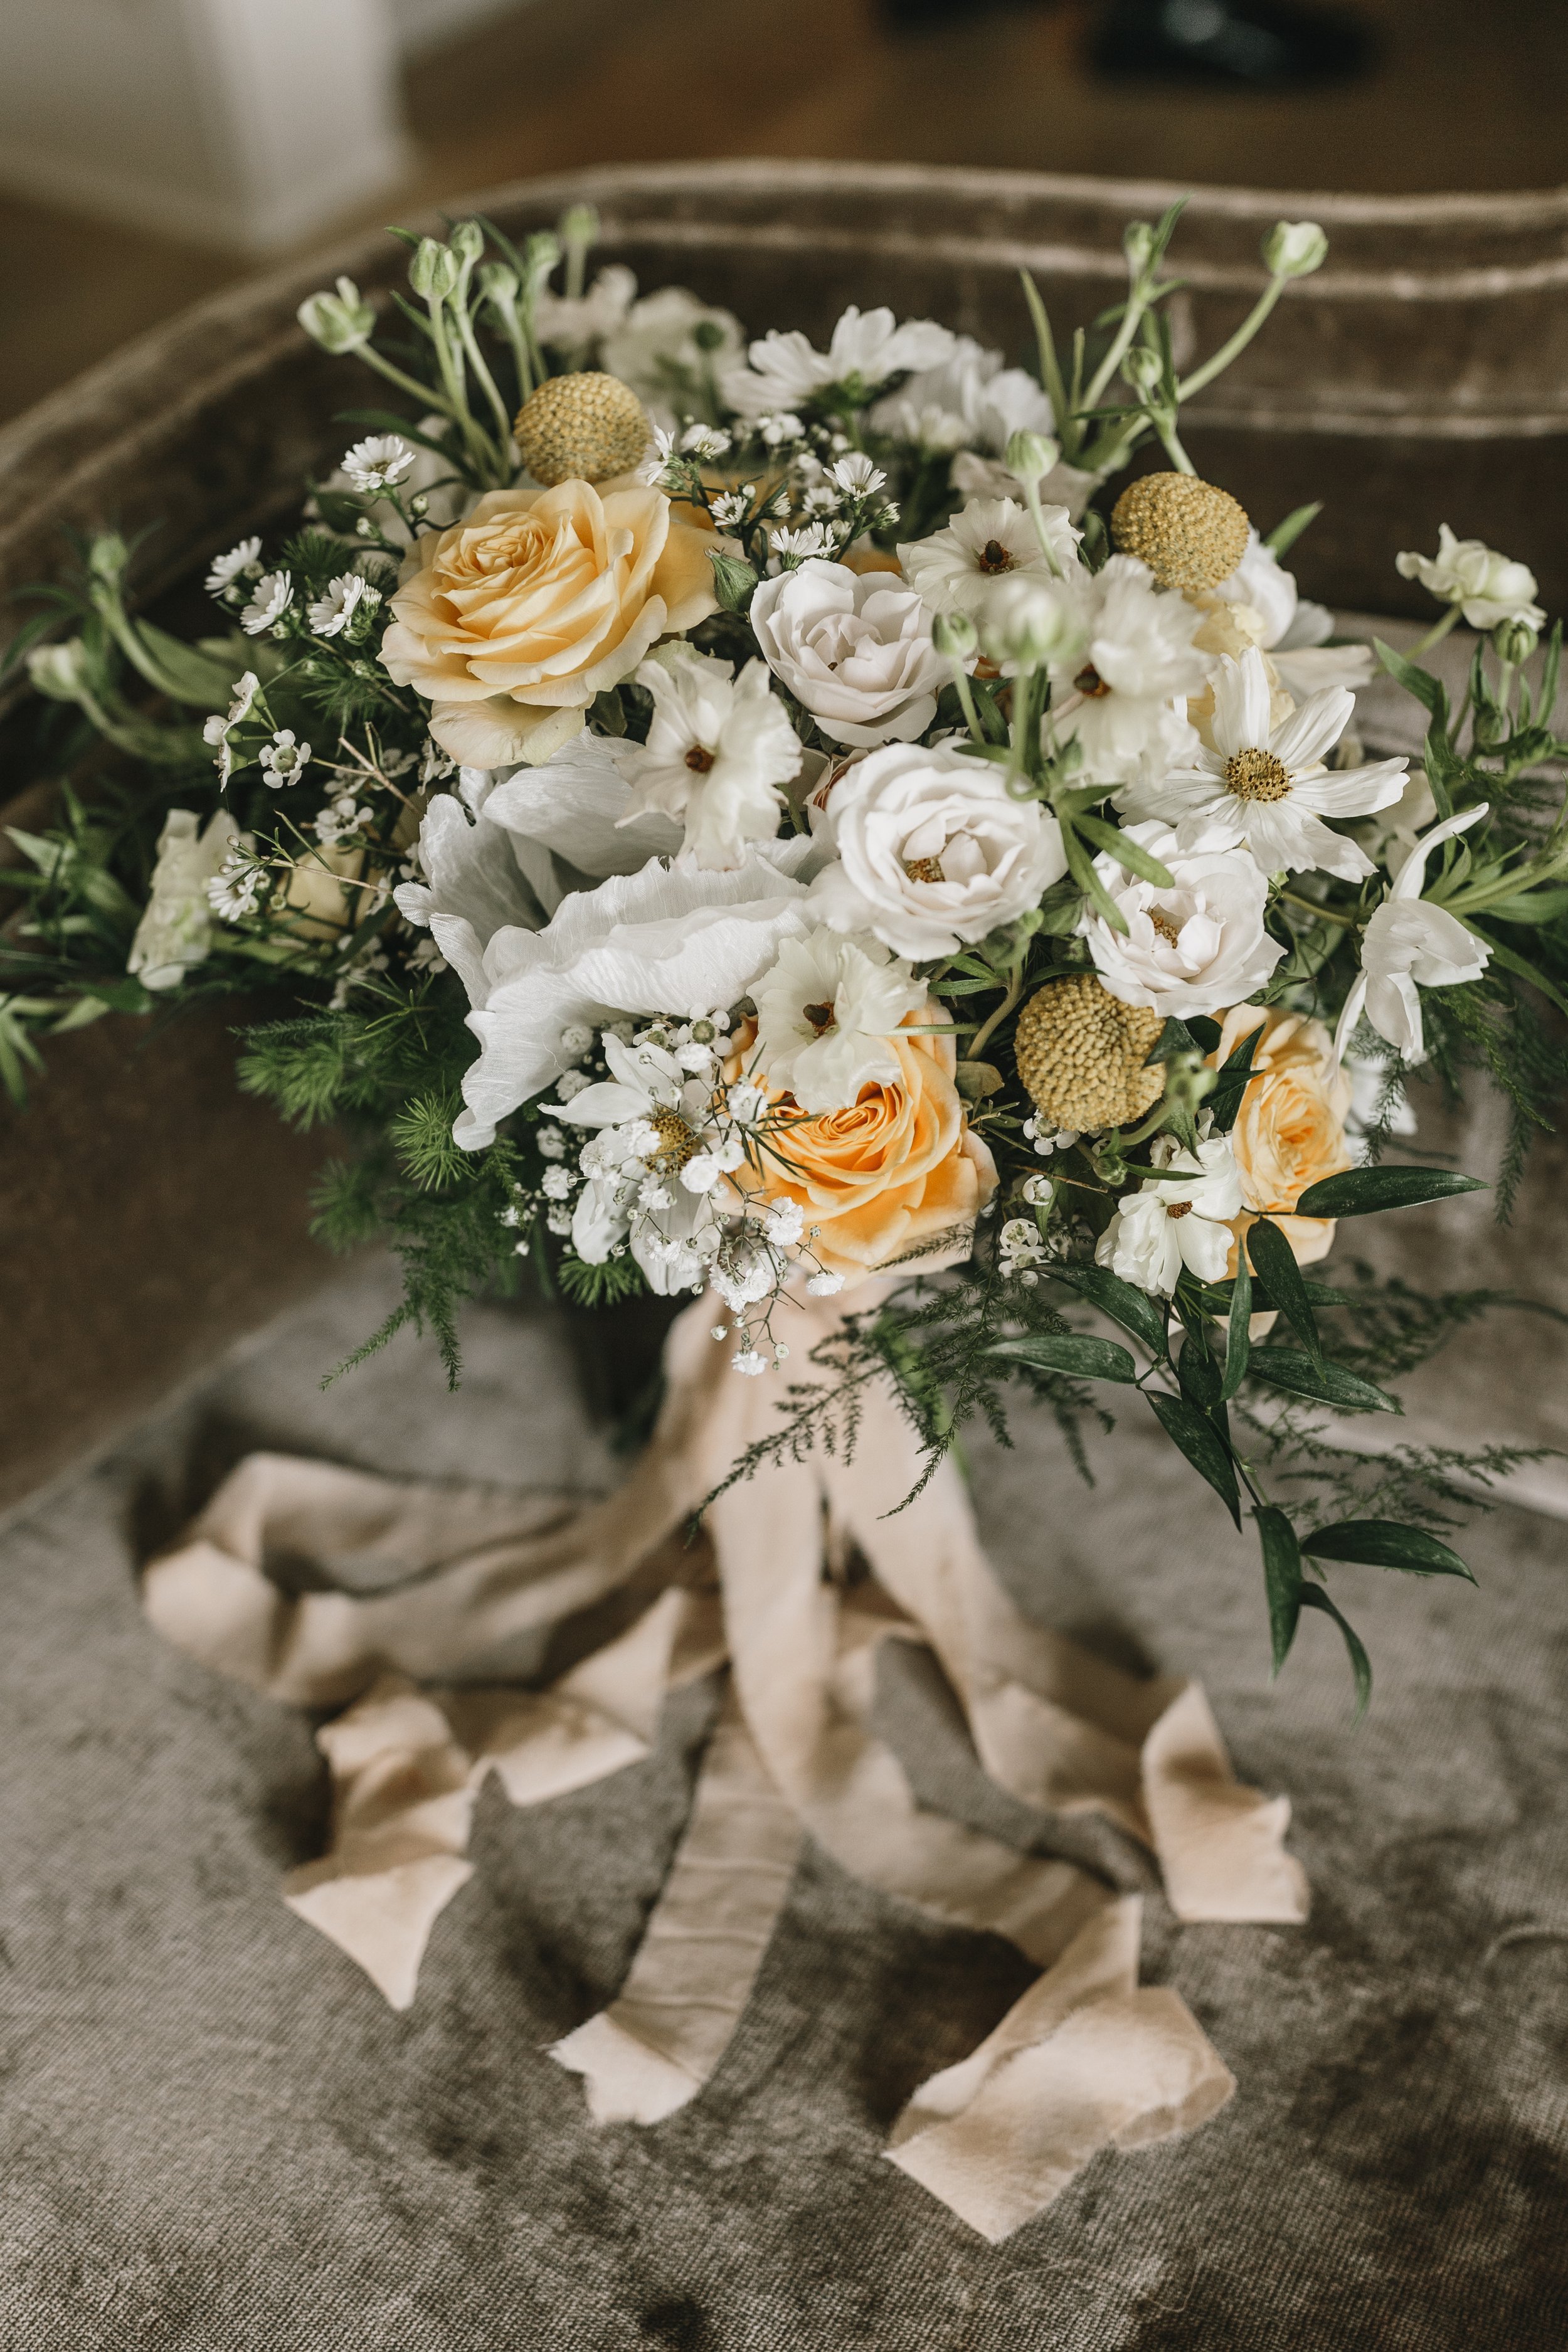 ivory-and-beau-wedding-and-florals-southern-wedding-savannah-florist-savannah-wedding-savannah-wedding-planner-the-wyld-dock-bar-historic-savannah-georgia-wedding-flowers-wedding-blog-wedding-inspiration-LAUREN+NICK_WEDDING-142.jpg